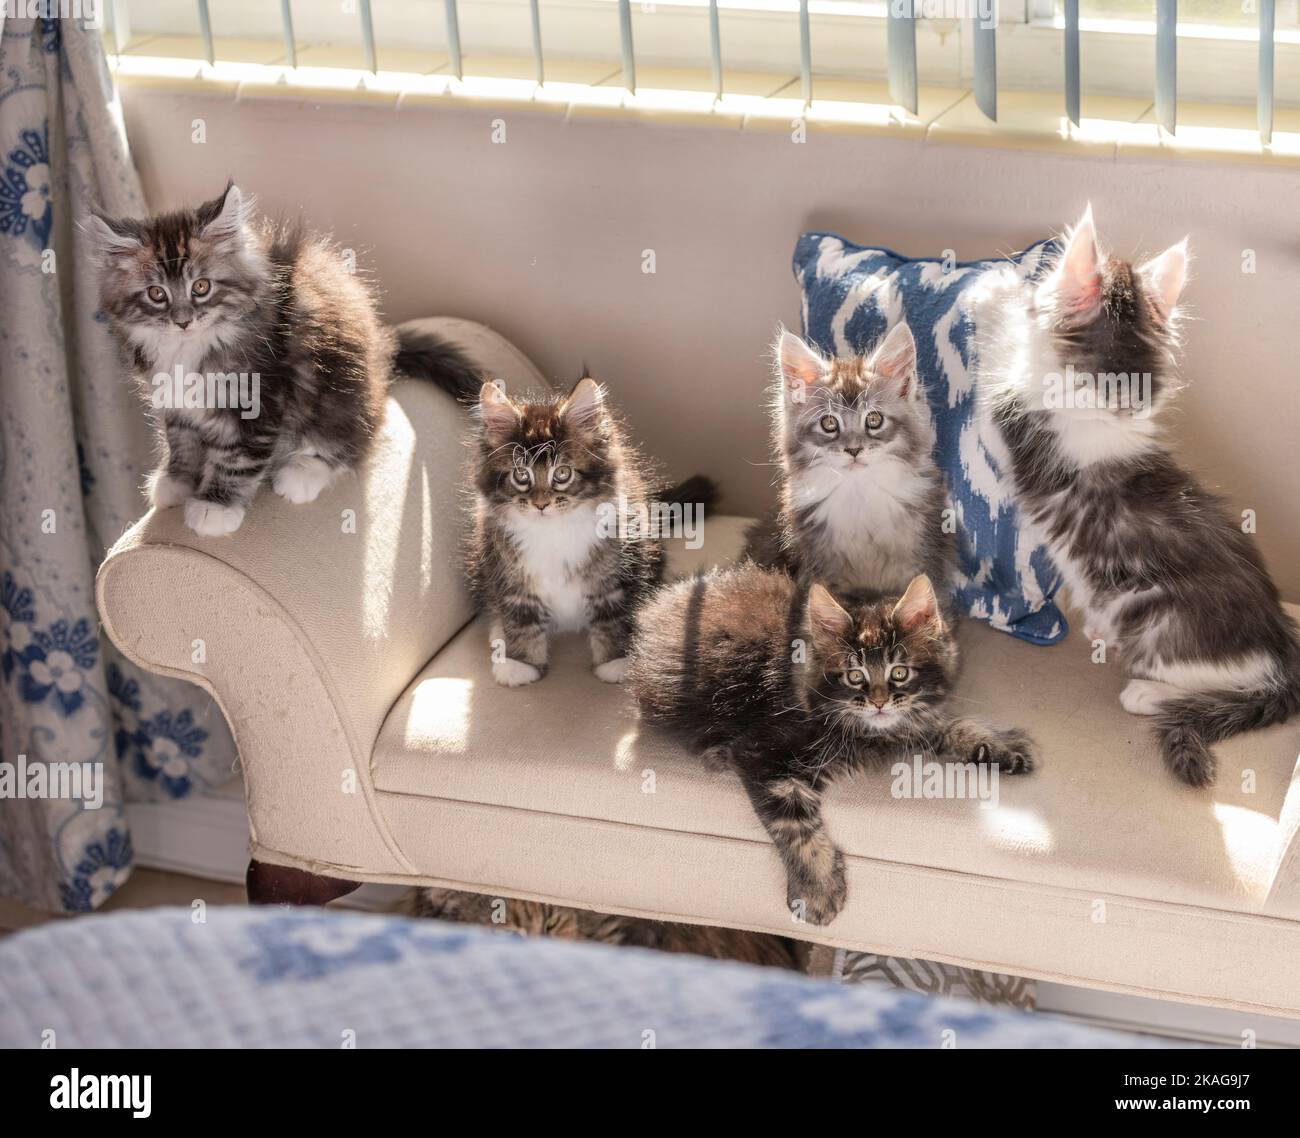 Maine Coon Cat kittens 9 weeks old perched on sofa by window Stock Photo